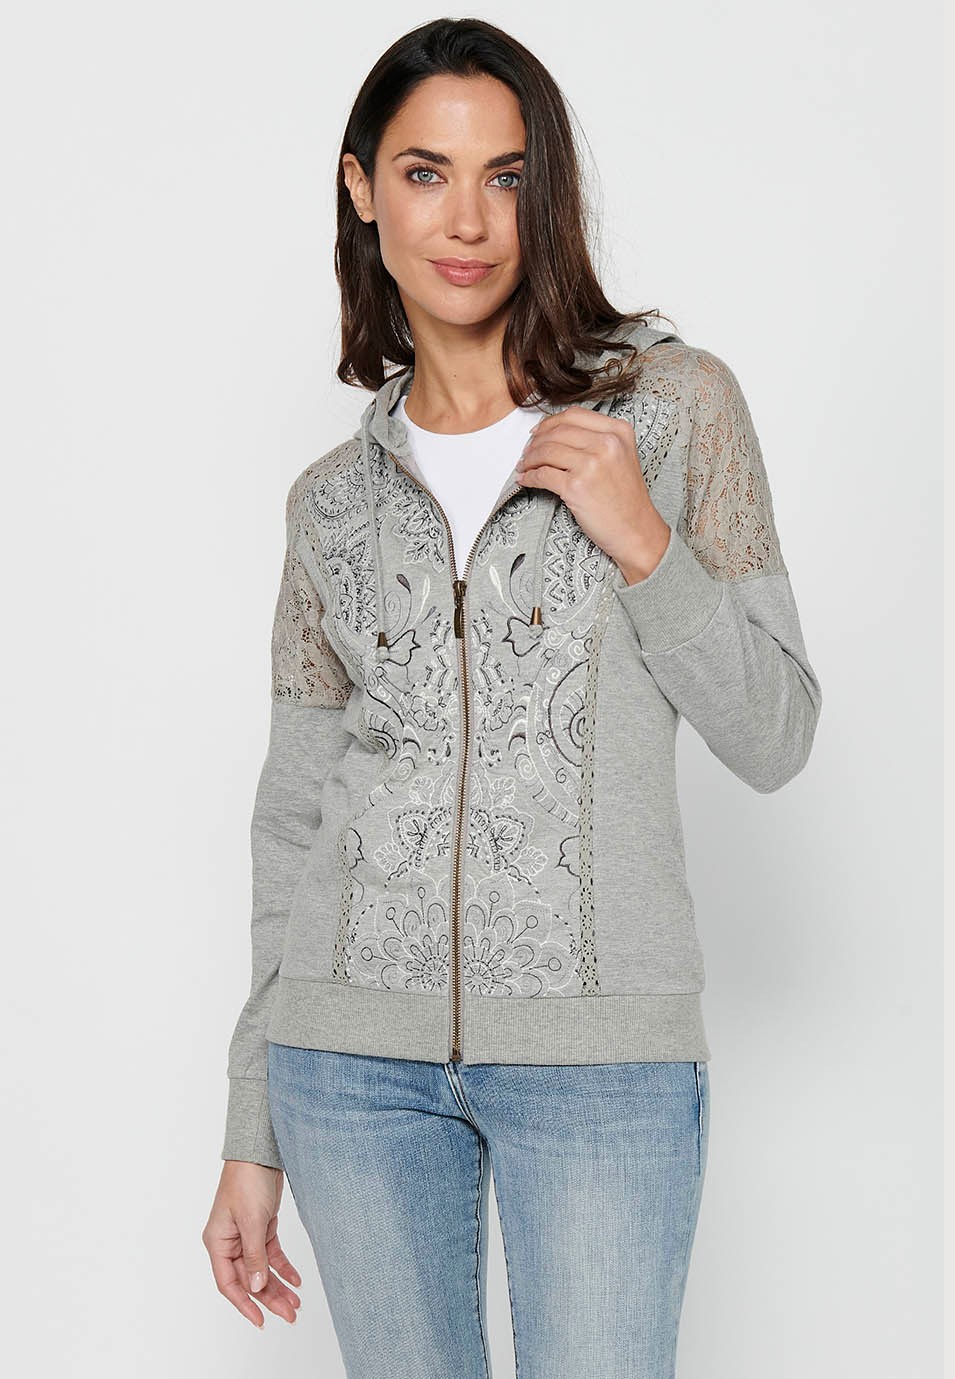 Sweatshirt jacket with zipper front closure and lace details with gray hooded collar for women 2